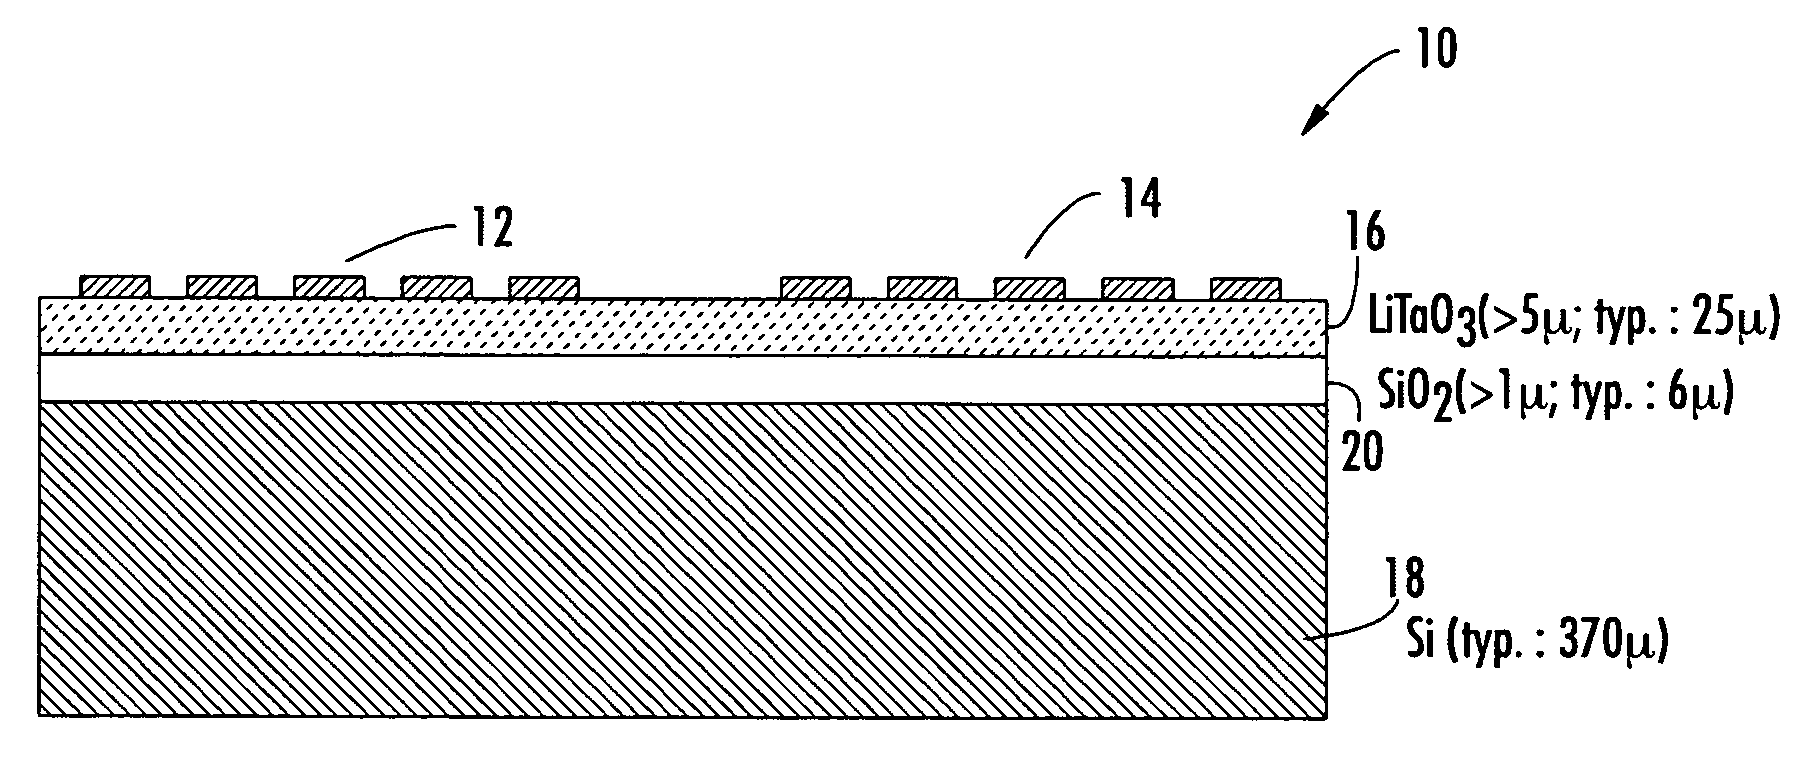 Saw filter device and method employing normal temperature bonding for producing desirable filter production and performance characteristics